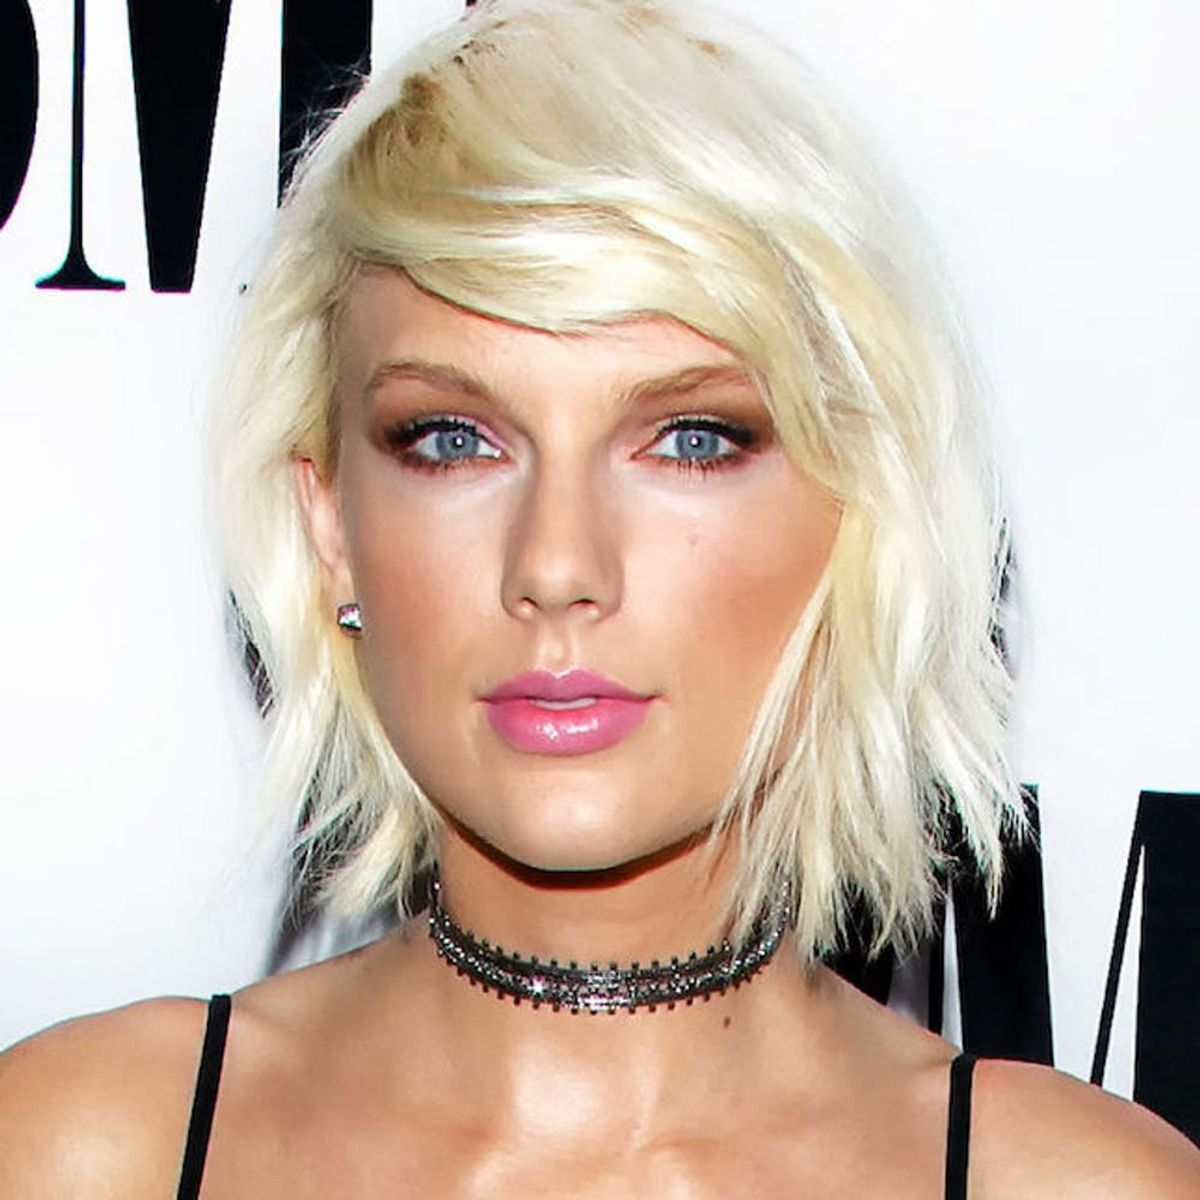 Get the Look of Taylor Swift’s Boho-Chic Rental Apartment